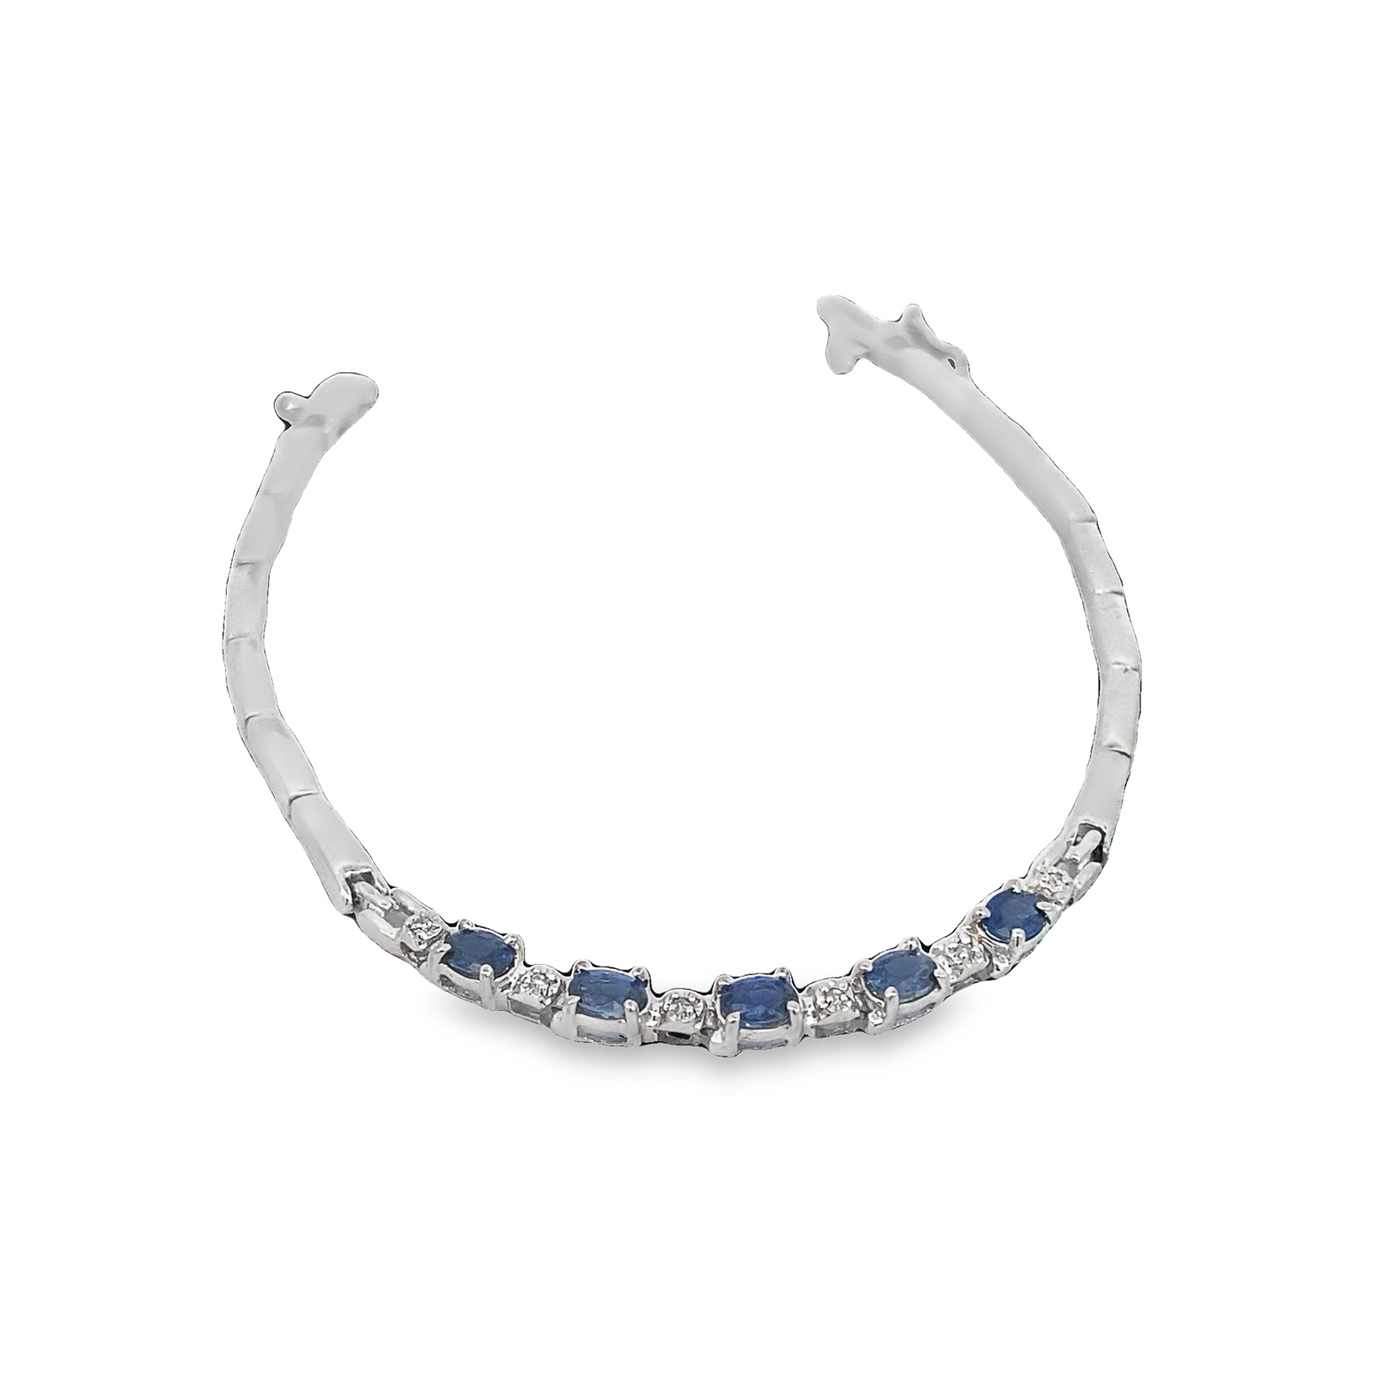 Estate 14K White Gold 7" Bar Station Style Bracelet Featuring Sapphires and Diamonds